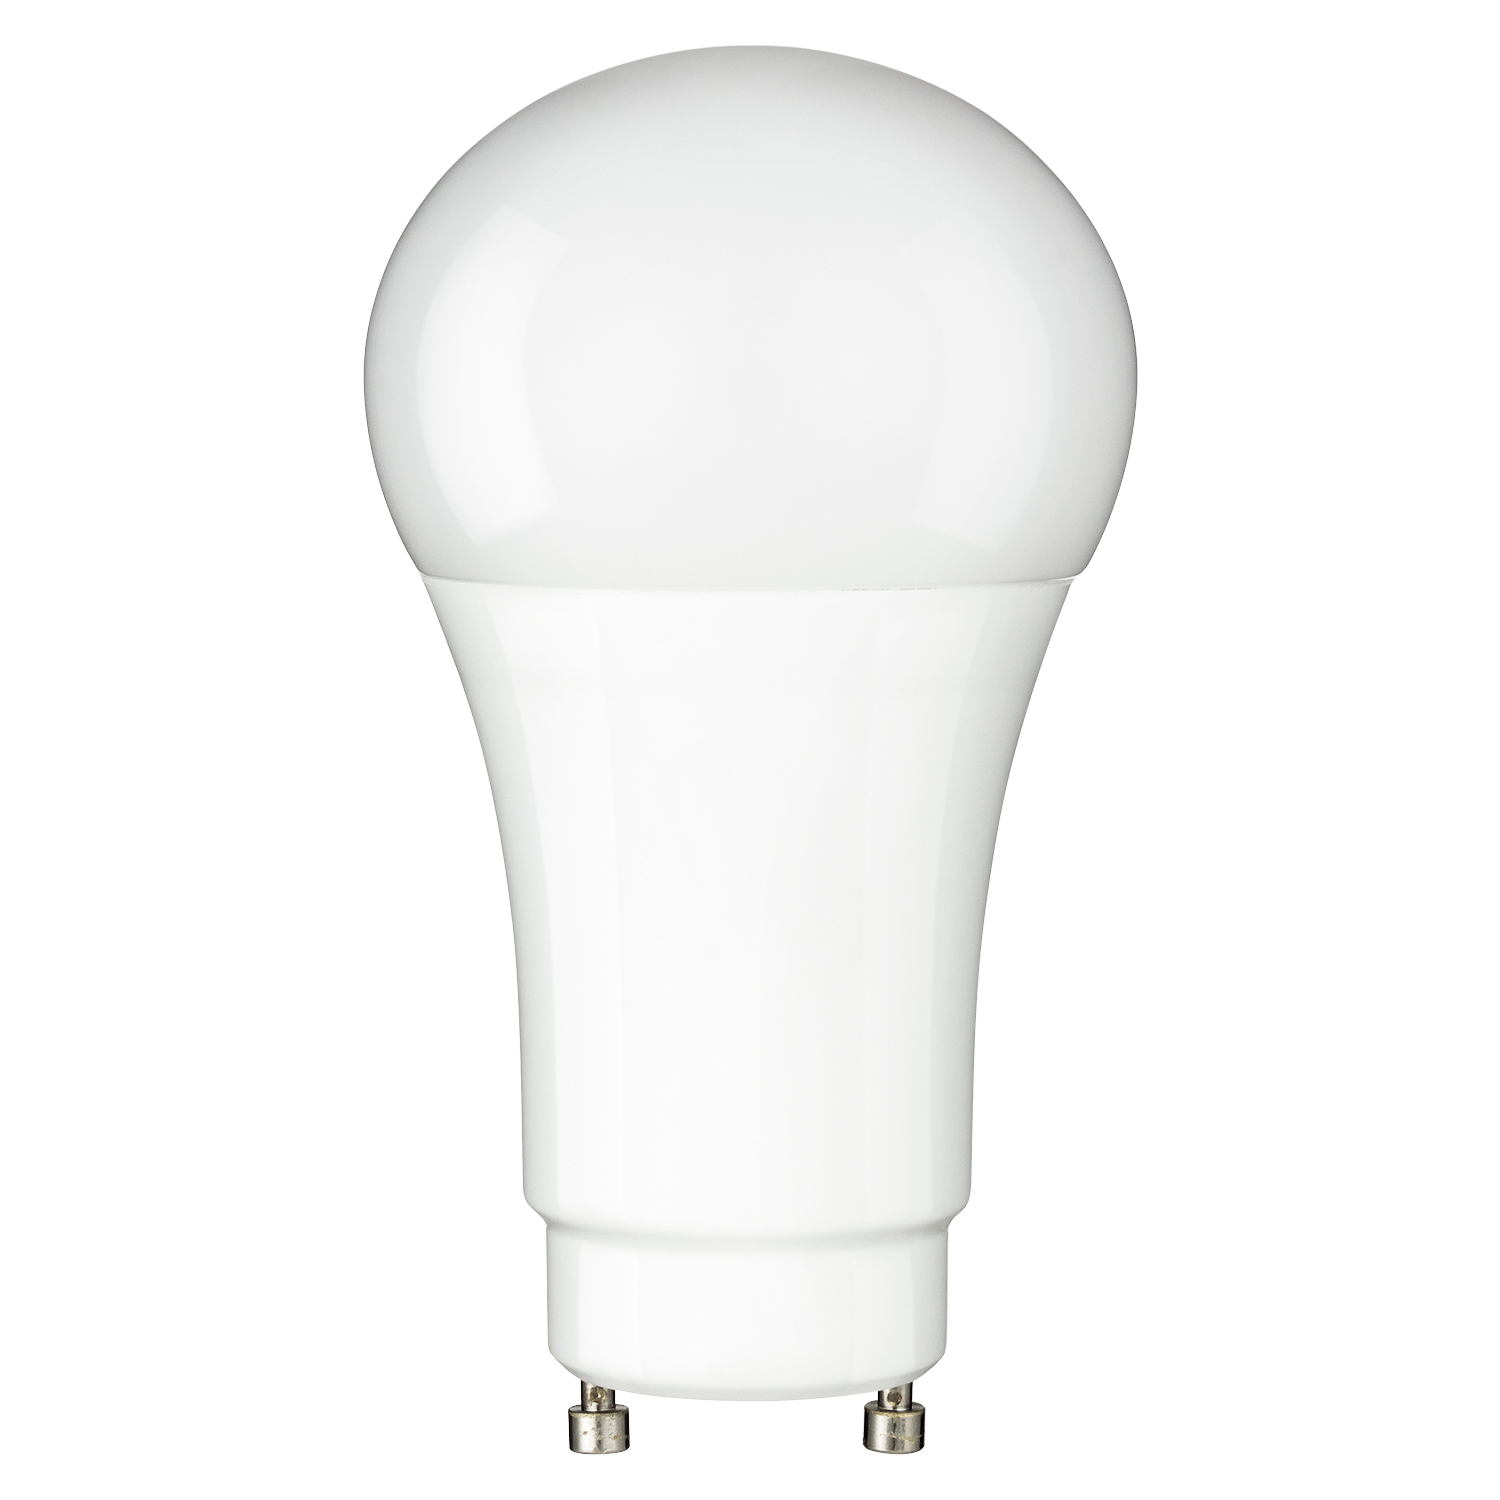 Light Bulb LED GU24 Twist n Lock Base Dimmable UL Listed 4000K - Click Image to Close